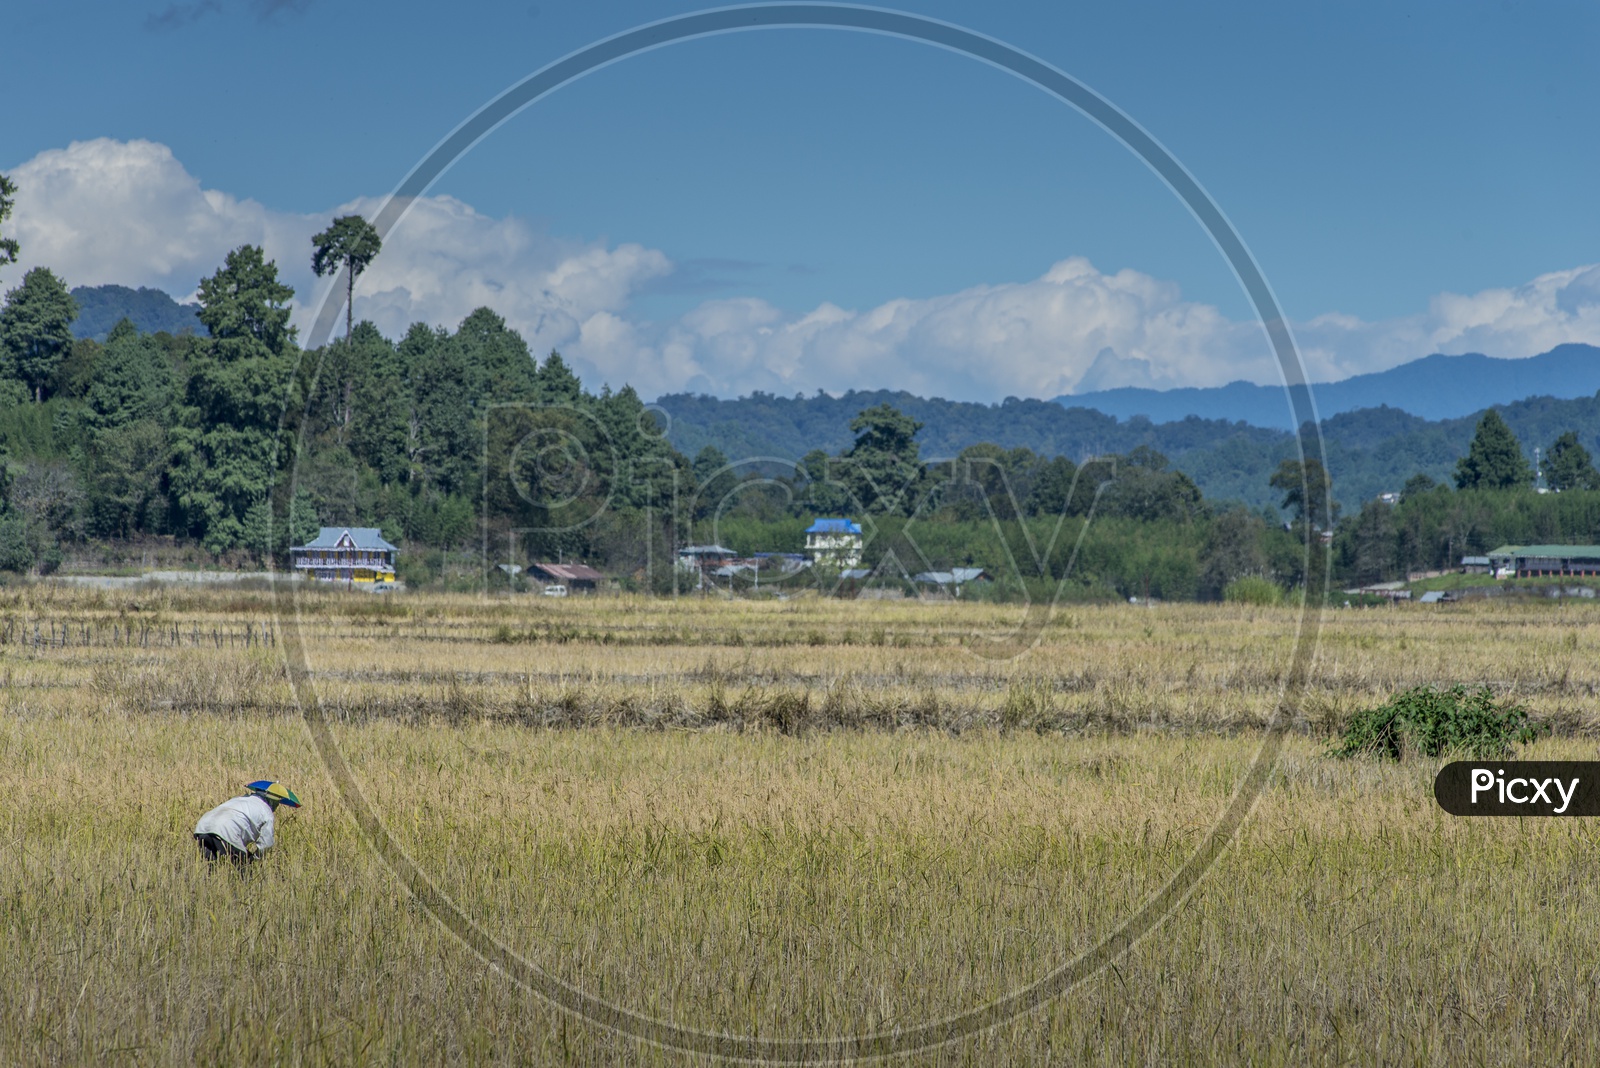 Farmer in Agriculture Fields, Apatani Tribes, HongVillage, Ziro